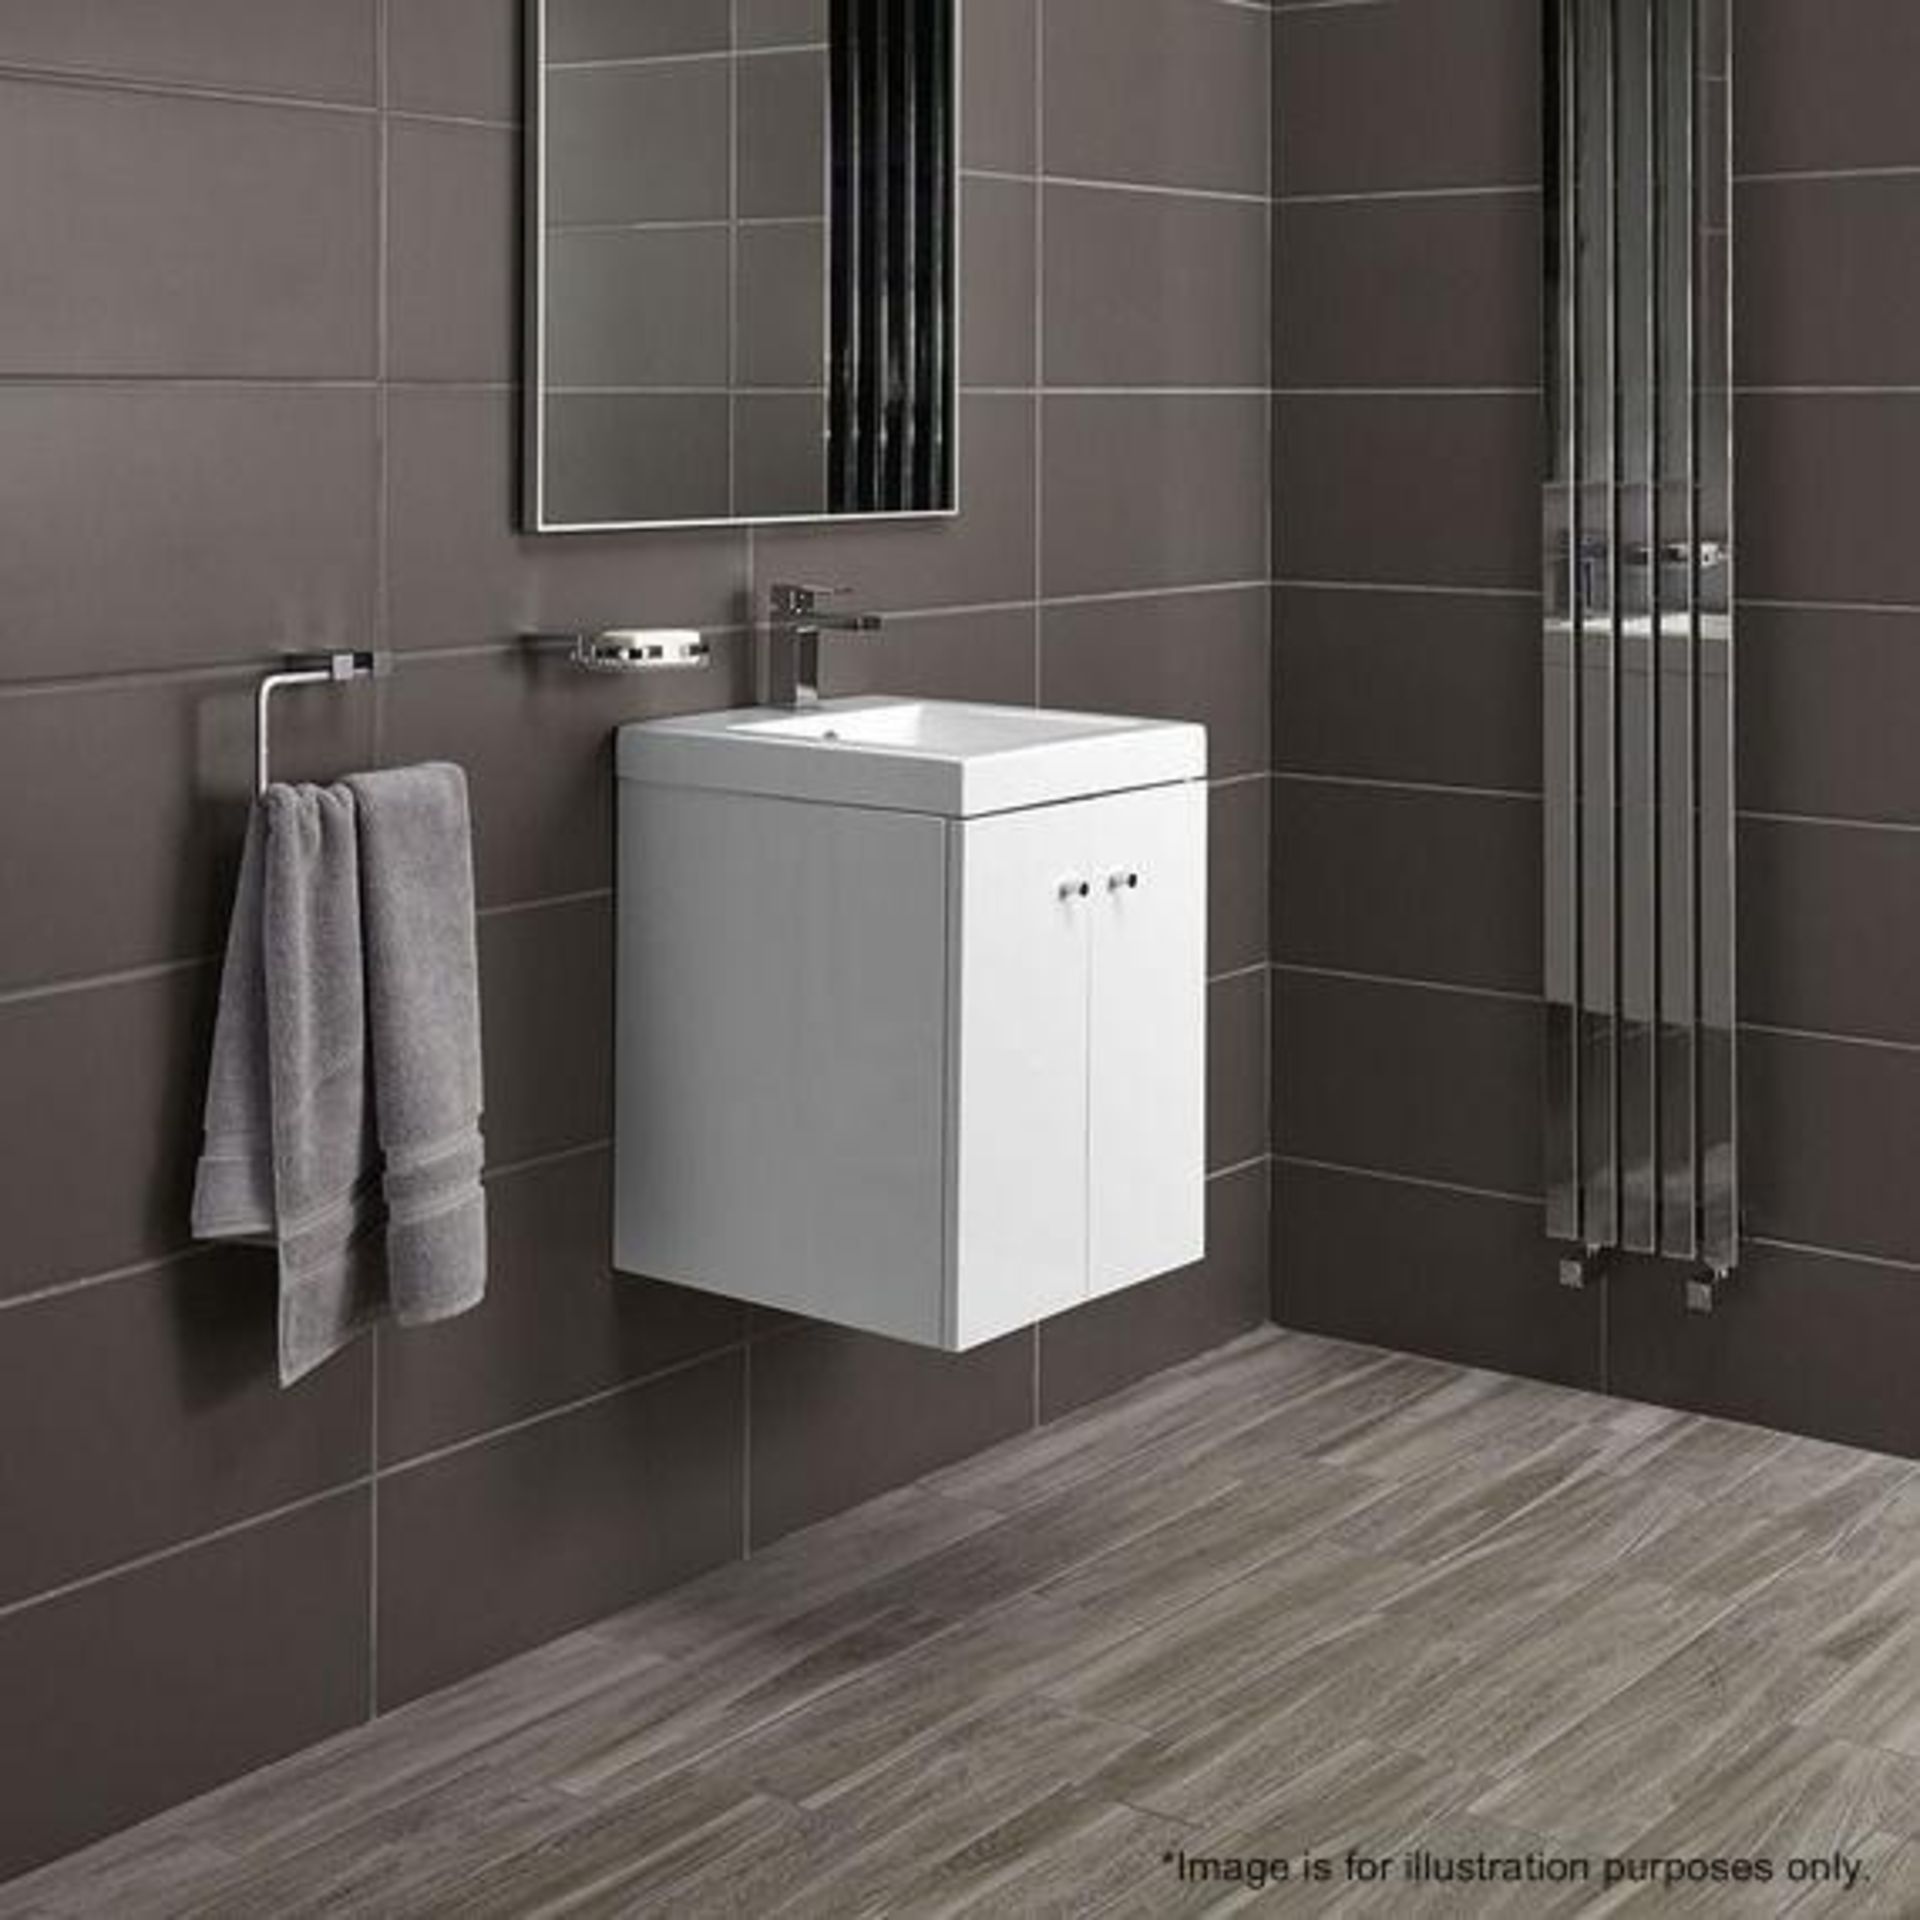 5 x Alpine Duo 400 Wall Hung Vanity Units In Gloss White - Brand New Boxed Stock - Dimensions: H49 x - Bild 4 aus 5